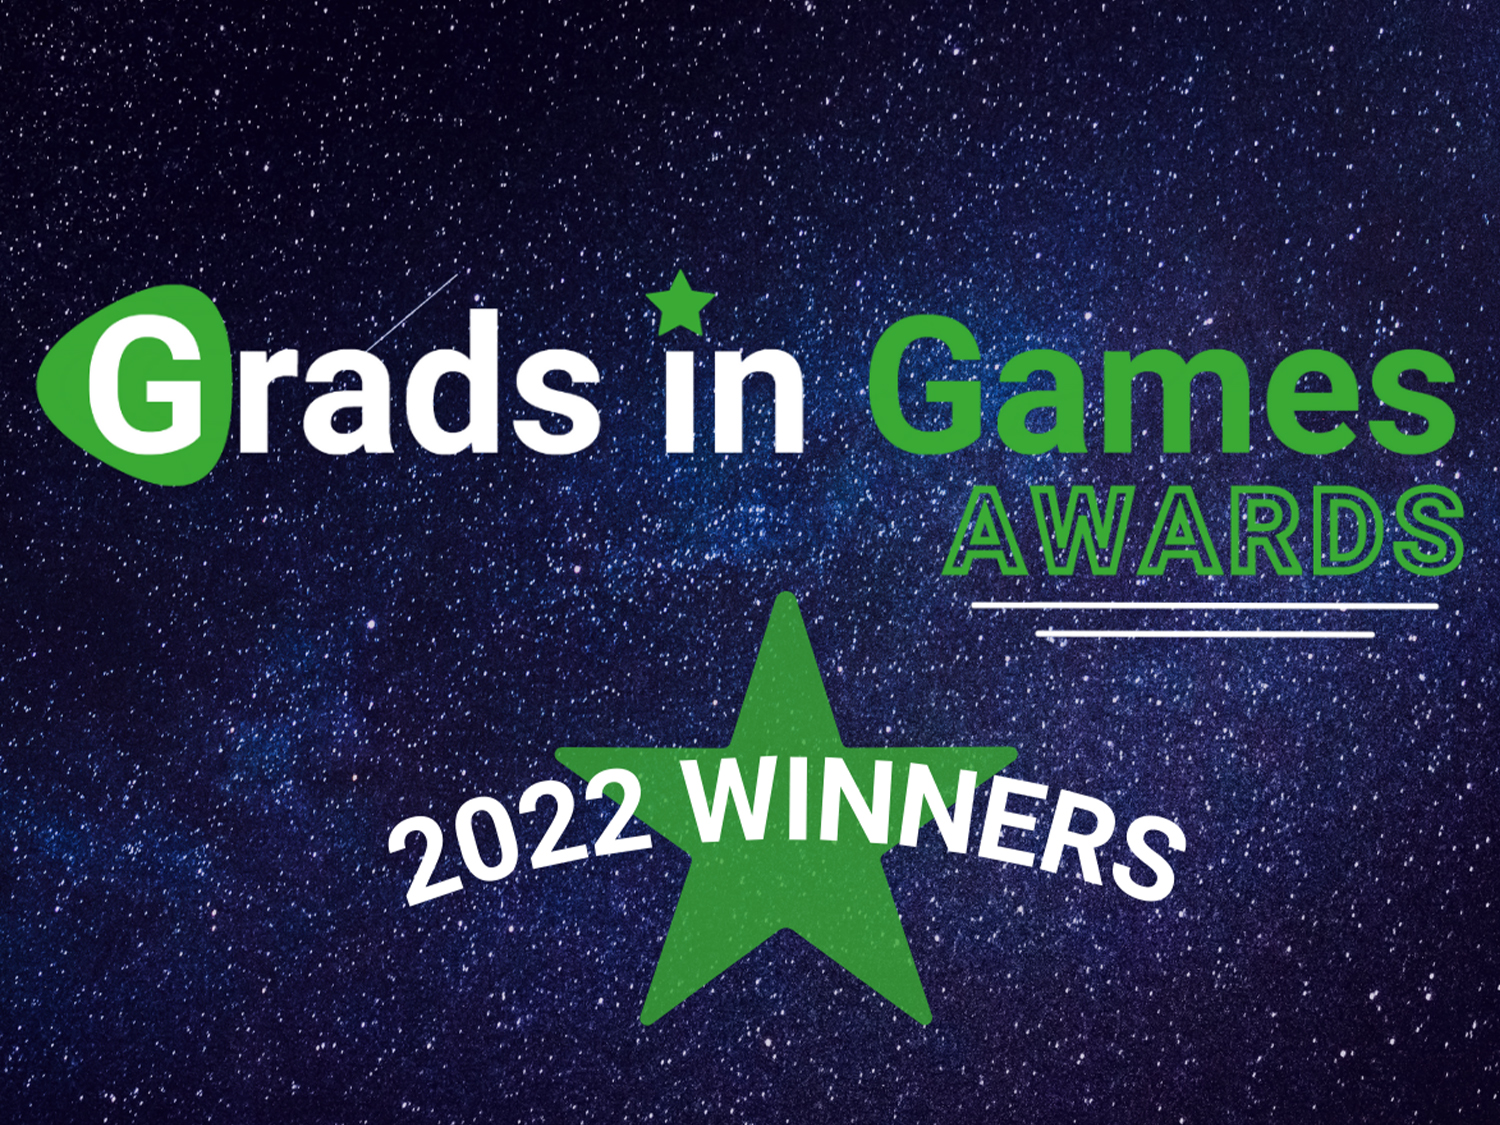 Grads in Games Awards 2022 winners graphic